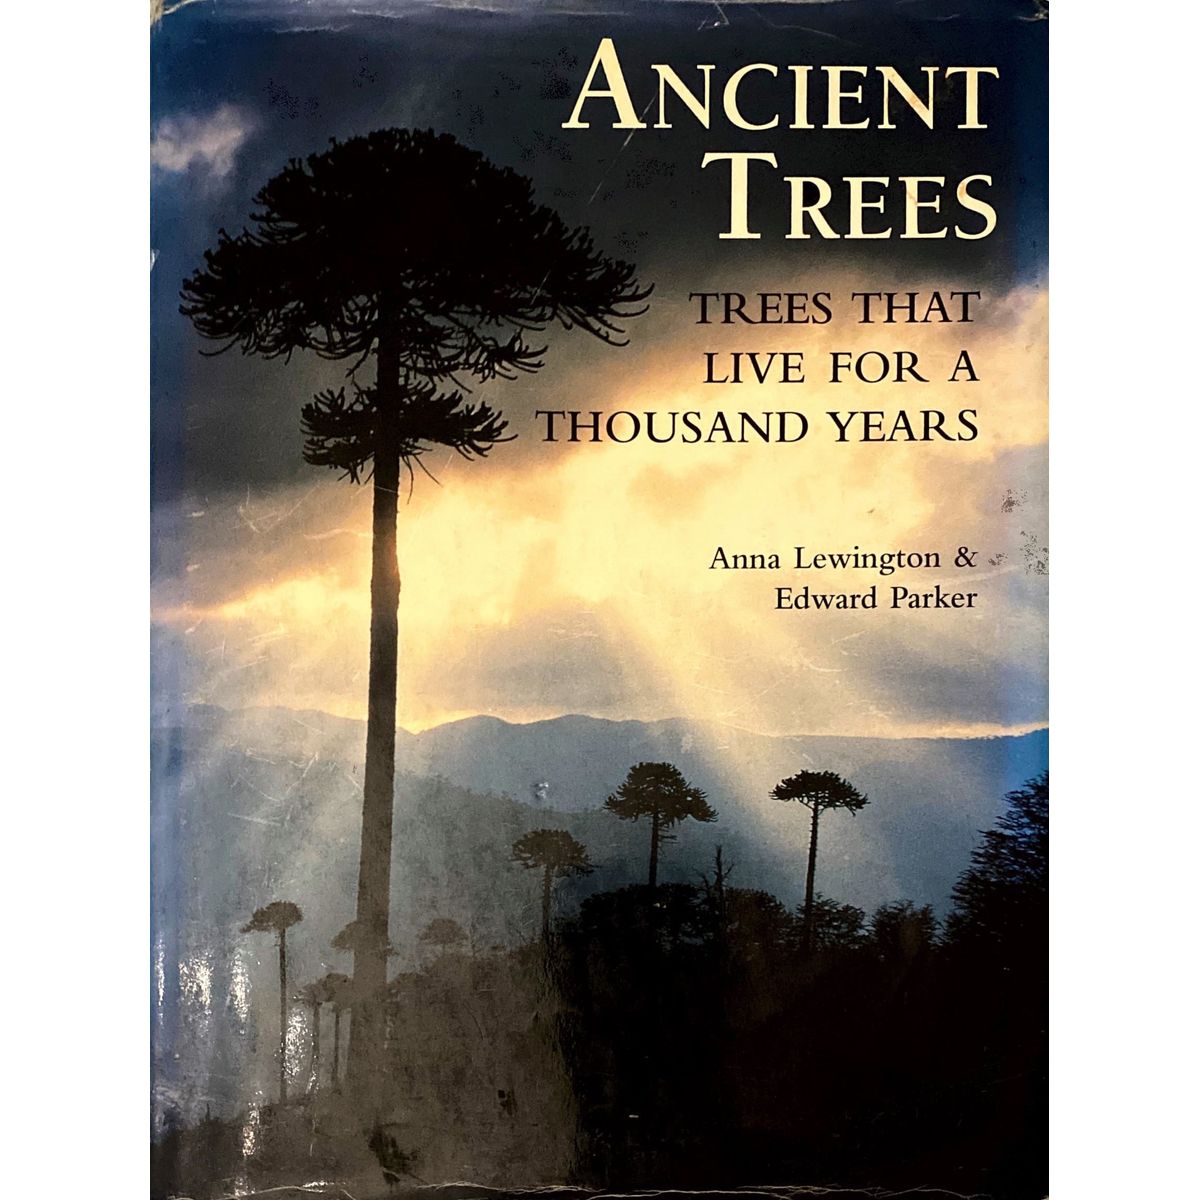 ISBN: 9781855857049 / 1855857049 - Ancient Trees: Trees That Live for a Thousand Years by Anna Lewington and Edward Parker [1999]